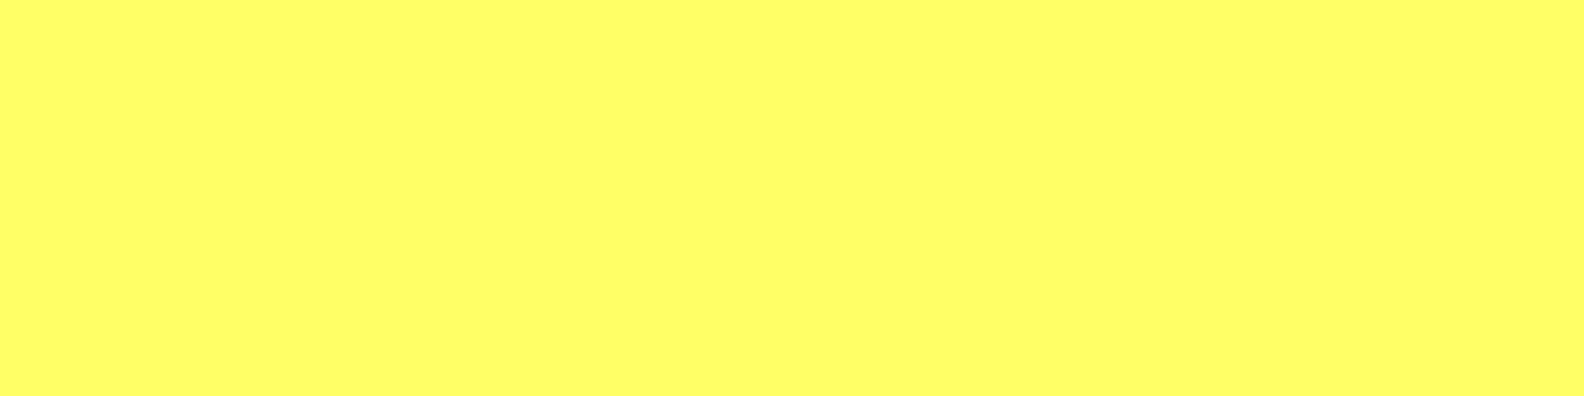 1584x396 Unmellow Yellow Solid Color Background